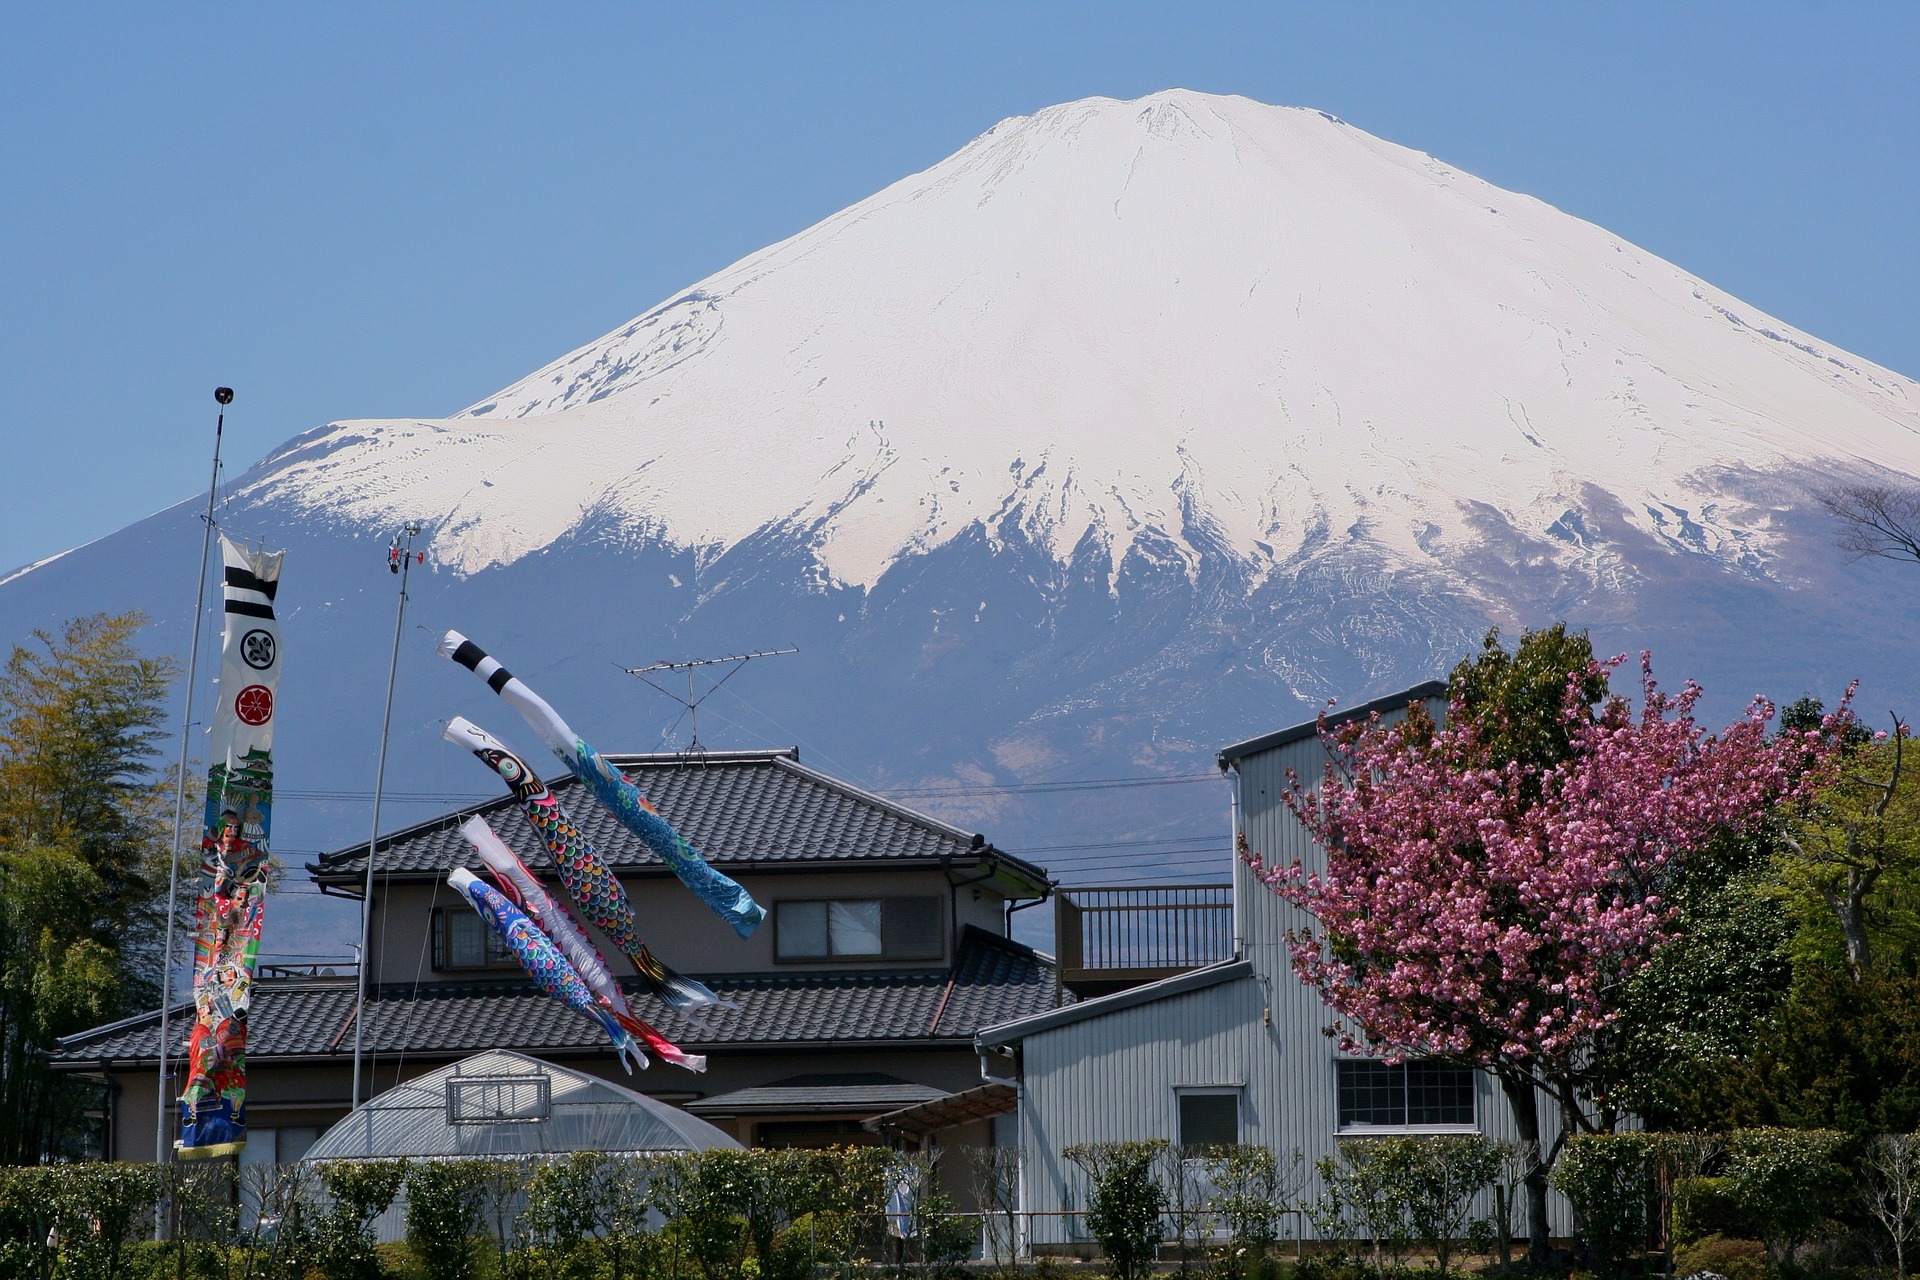 Japan Mt. Fuji with Cherry Blossom tree in foreground